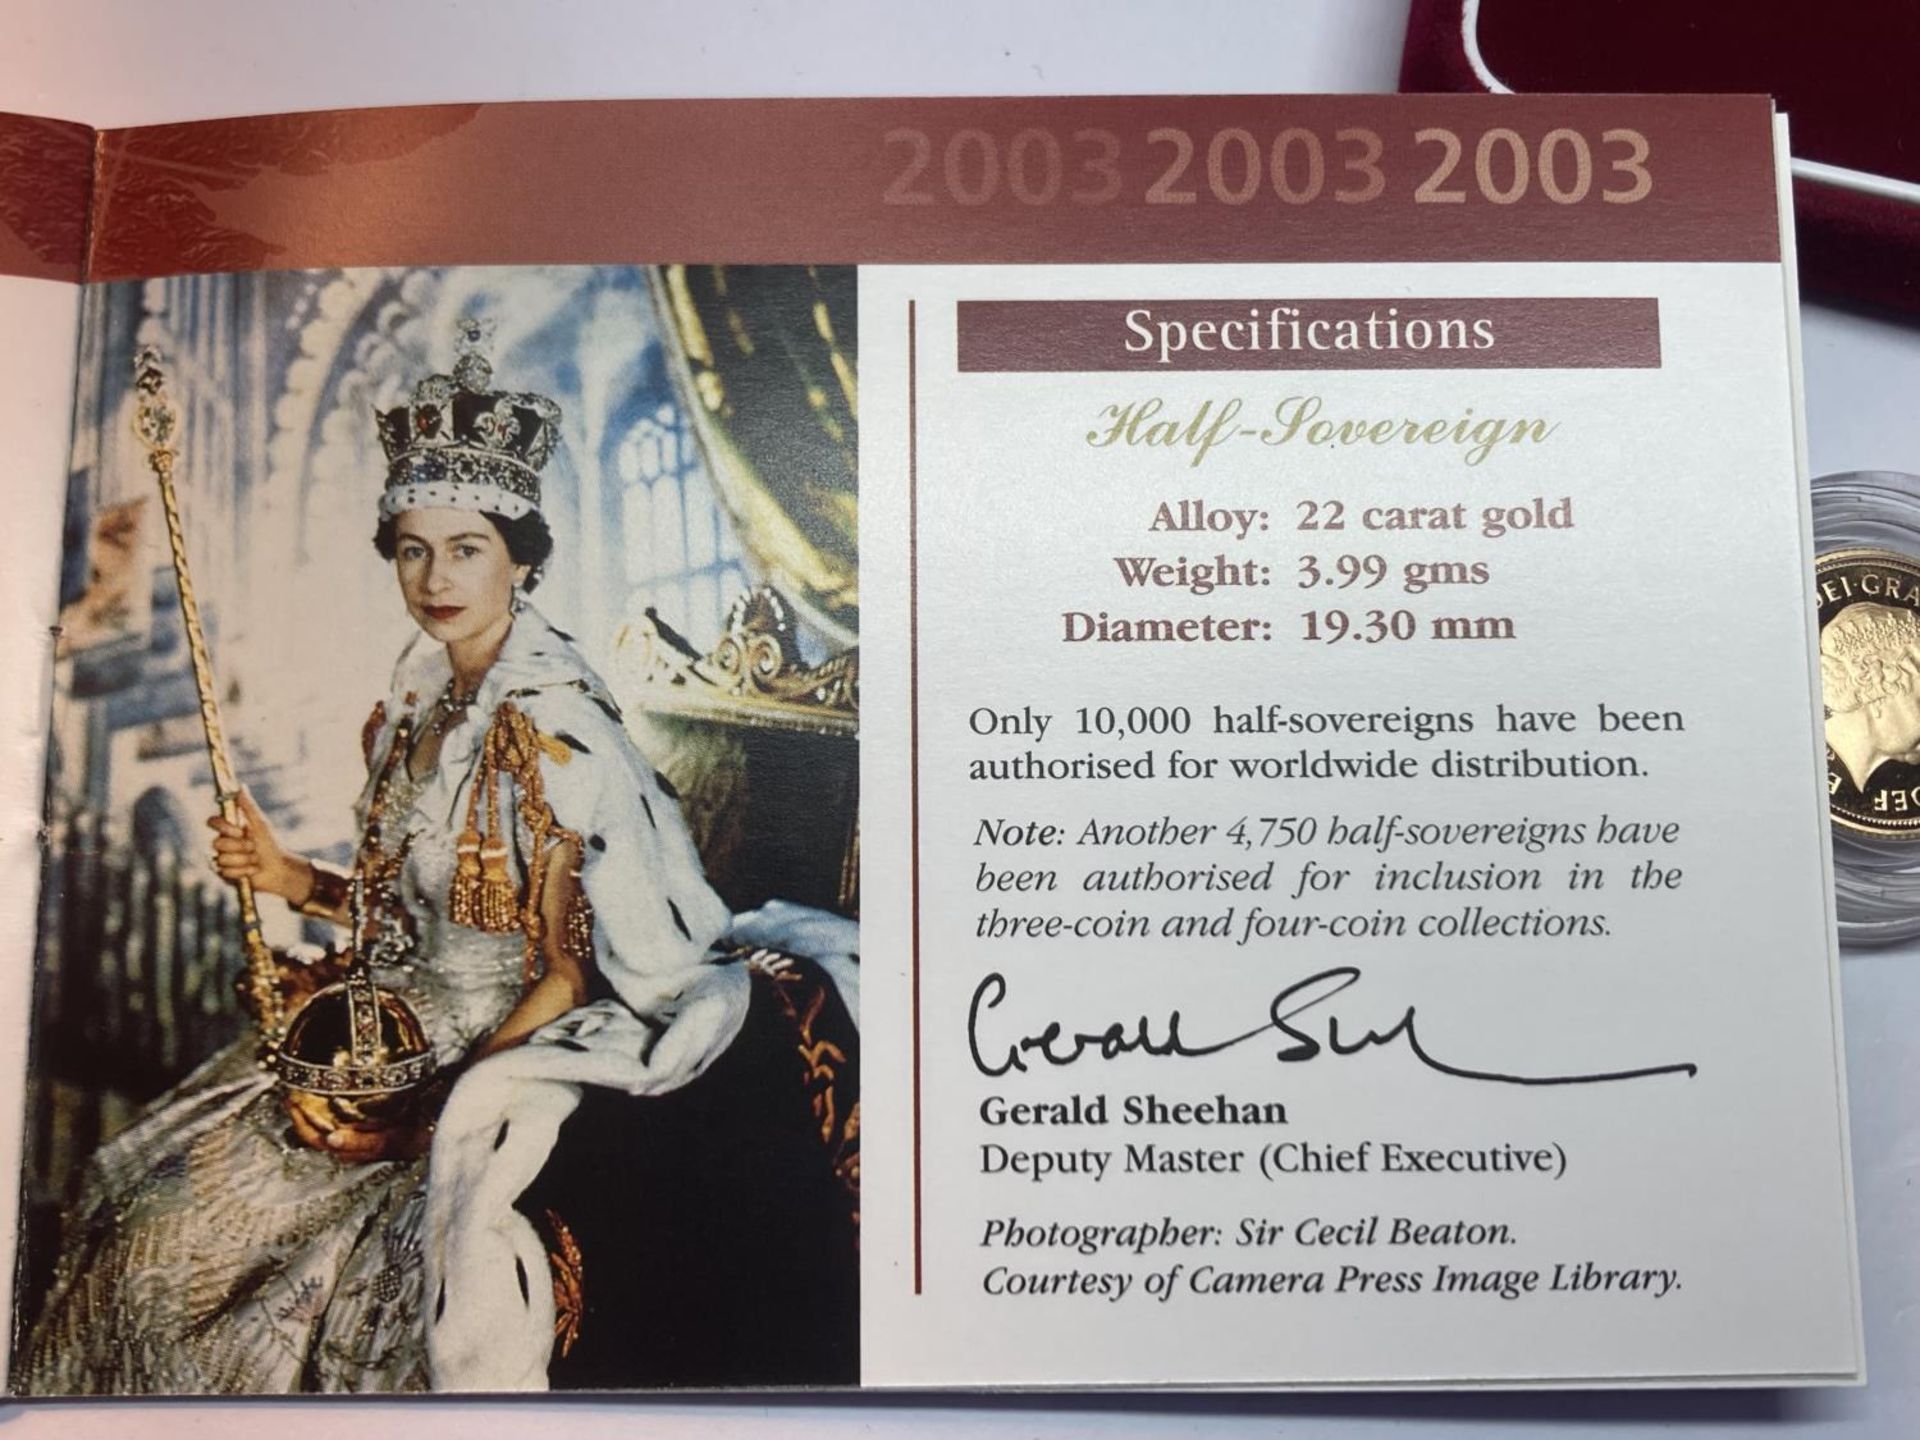 A 2003 GOLD PROOF HALF SOVEREIGN NO 03411 OF 10,000 IN A PRESENTATION BOX WITH CERTIFICATE OF - Image 5 of 5